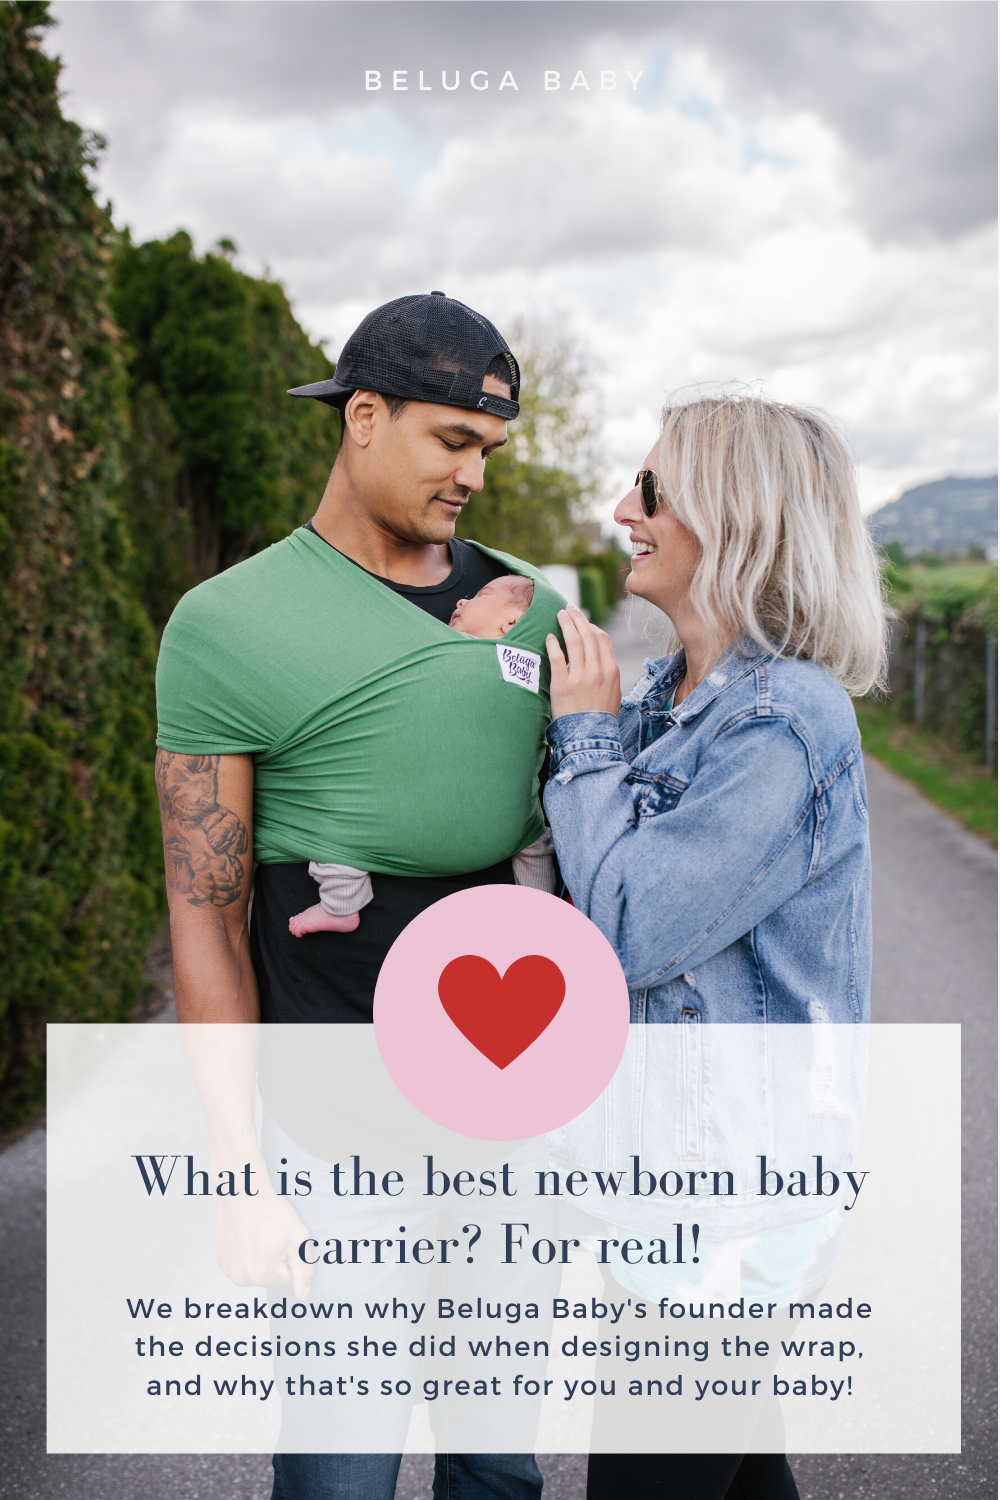 What really is the best newborn baby carrier?